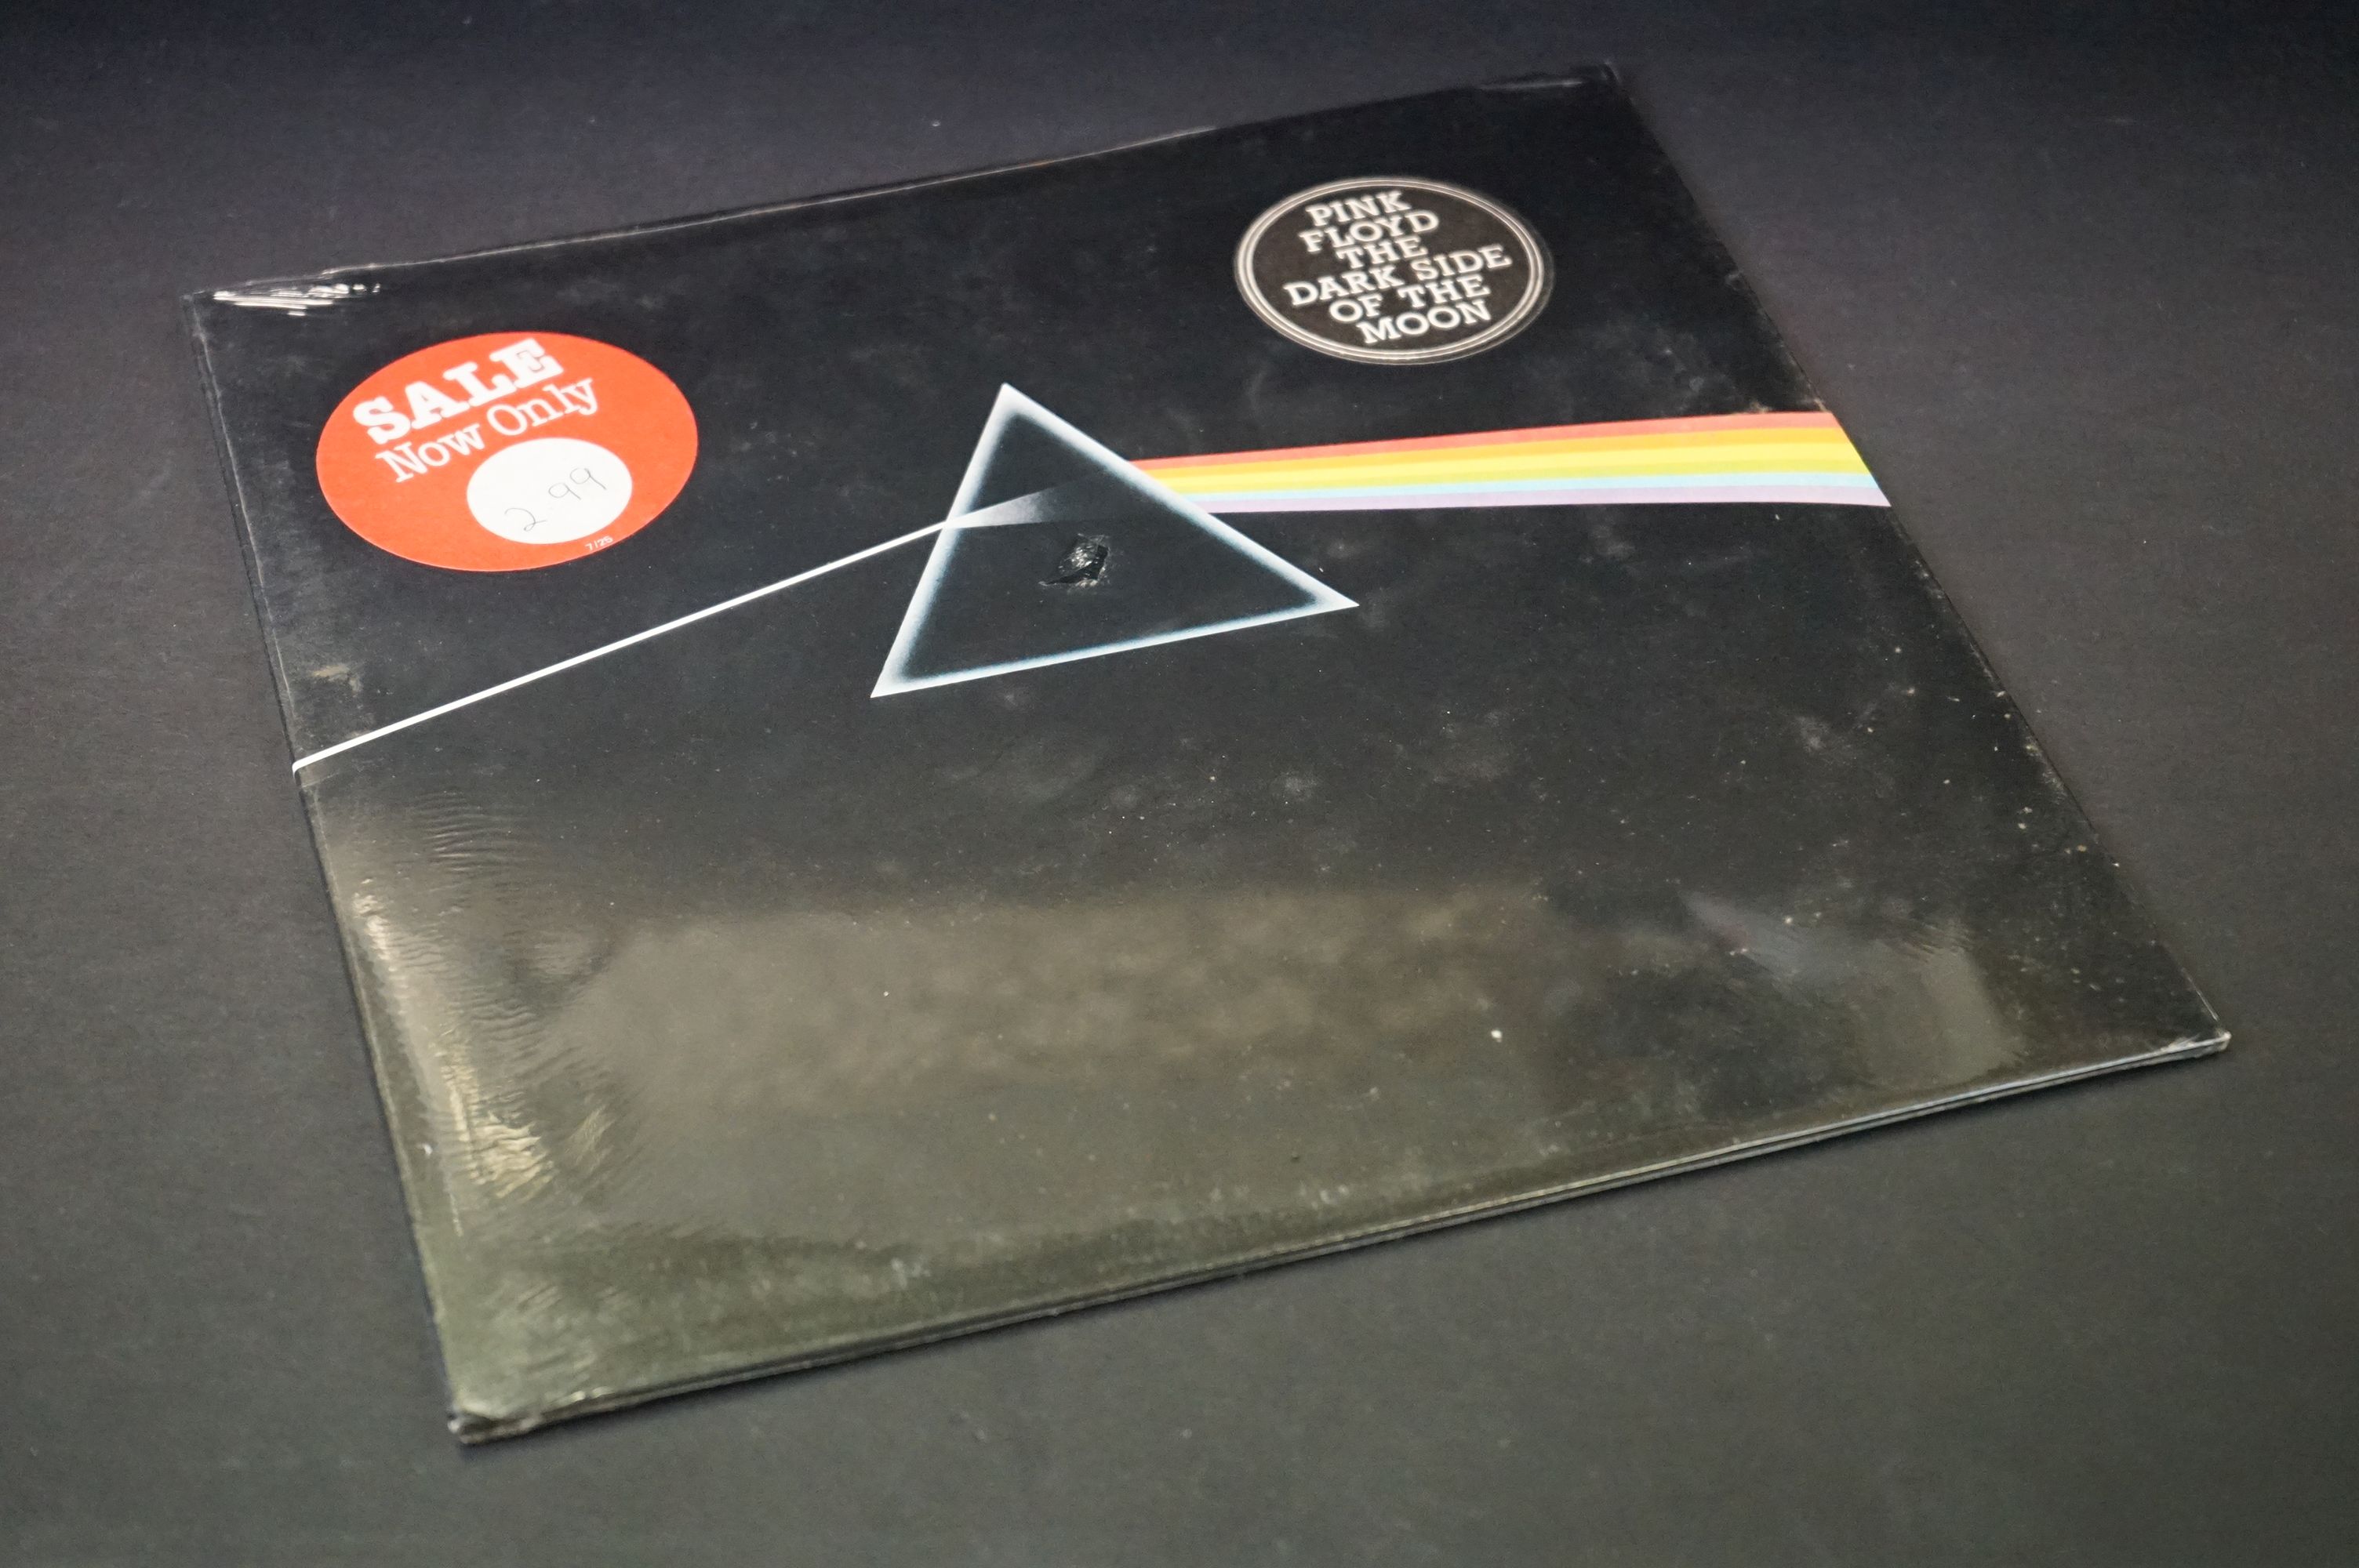 Vinyl - Pink Floyd Dark Side Of The Moon on Harvest SHVL 804 early press sealed in shrink, with some - Image 7 of 7